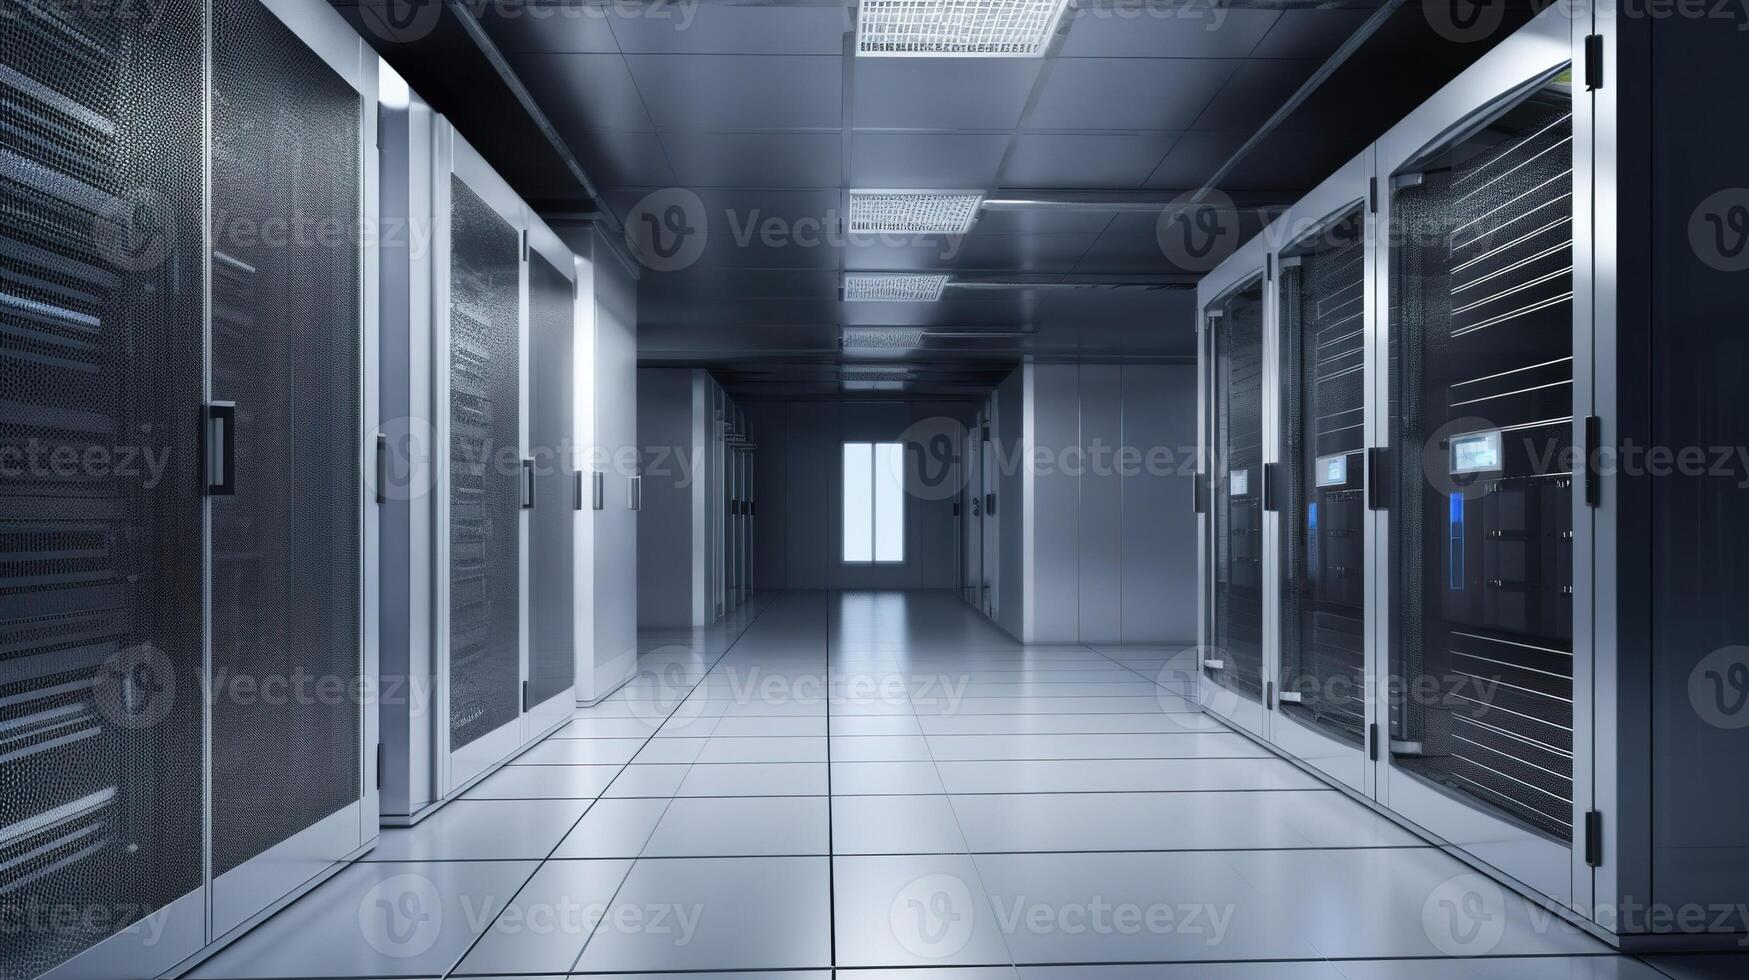 A Network Security Server Room Filled with Computer Racks. photo